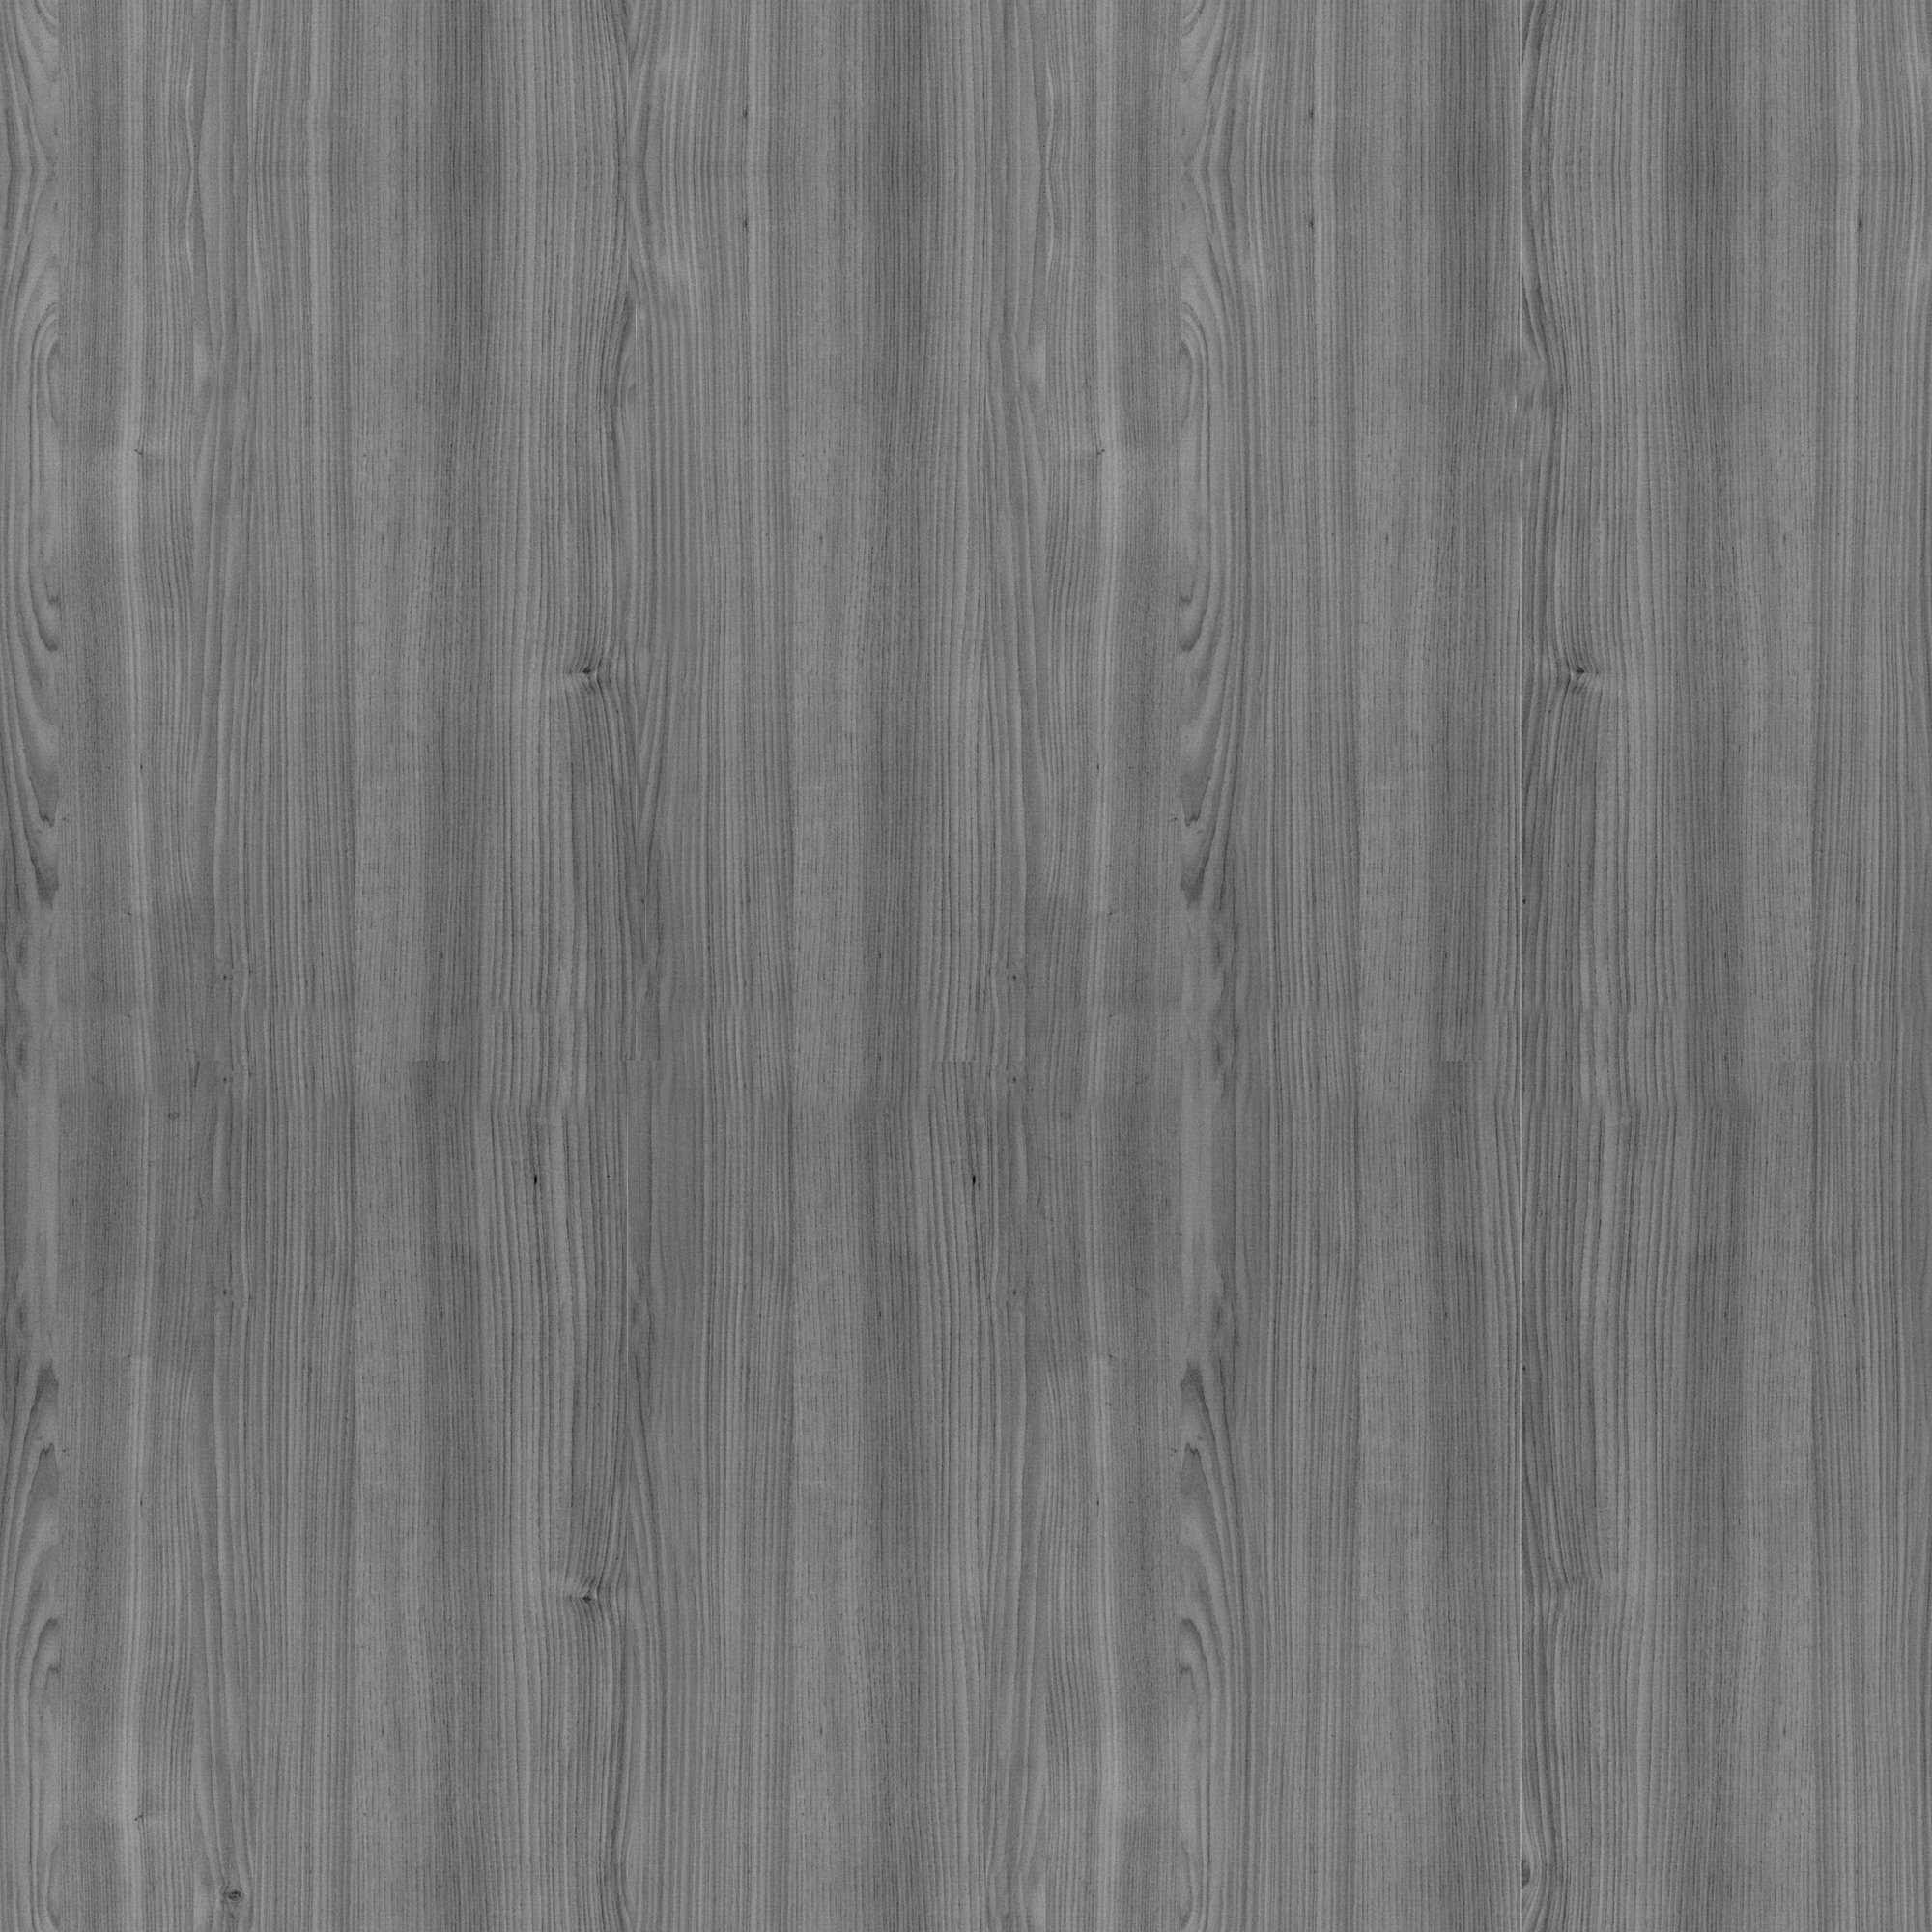 AS2_wood_29_specular